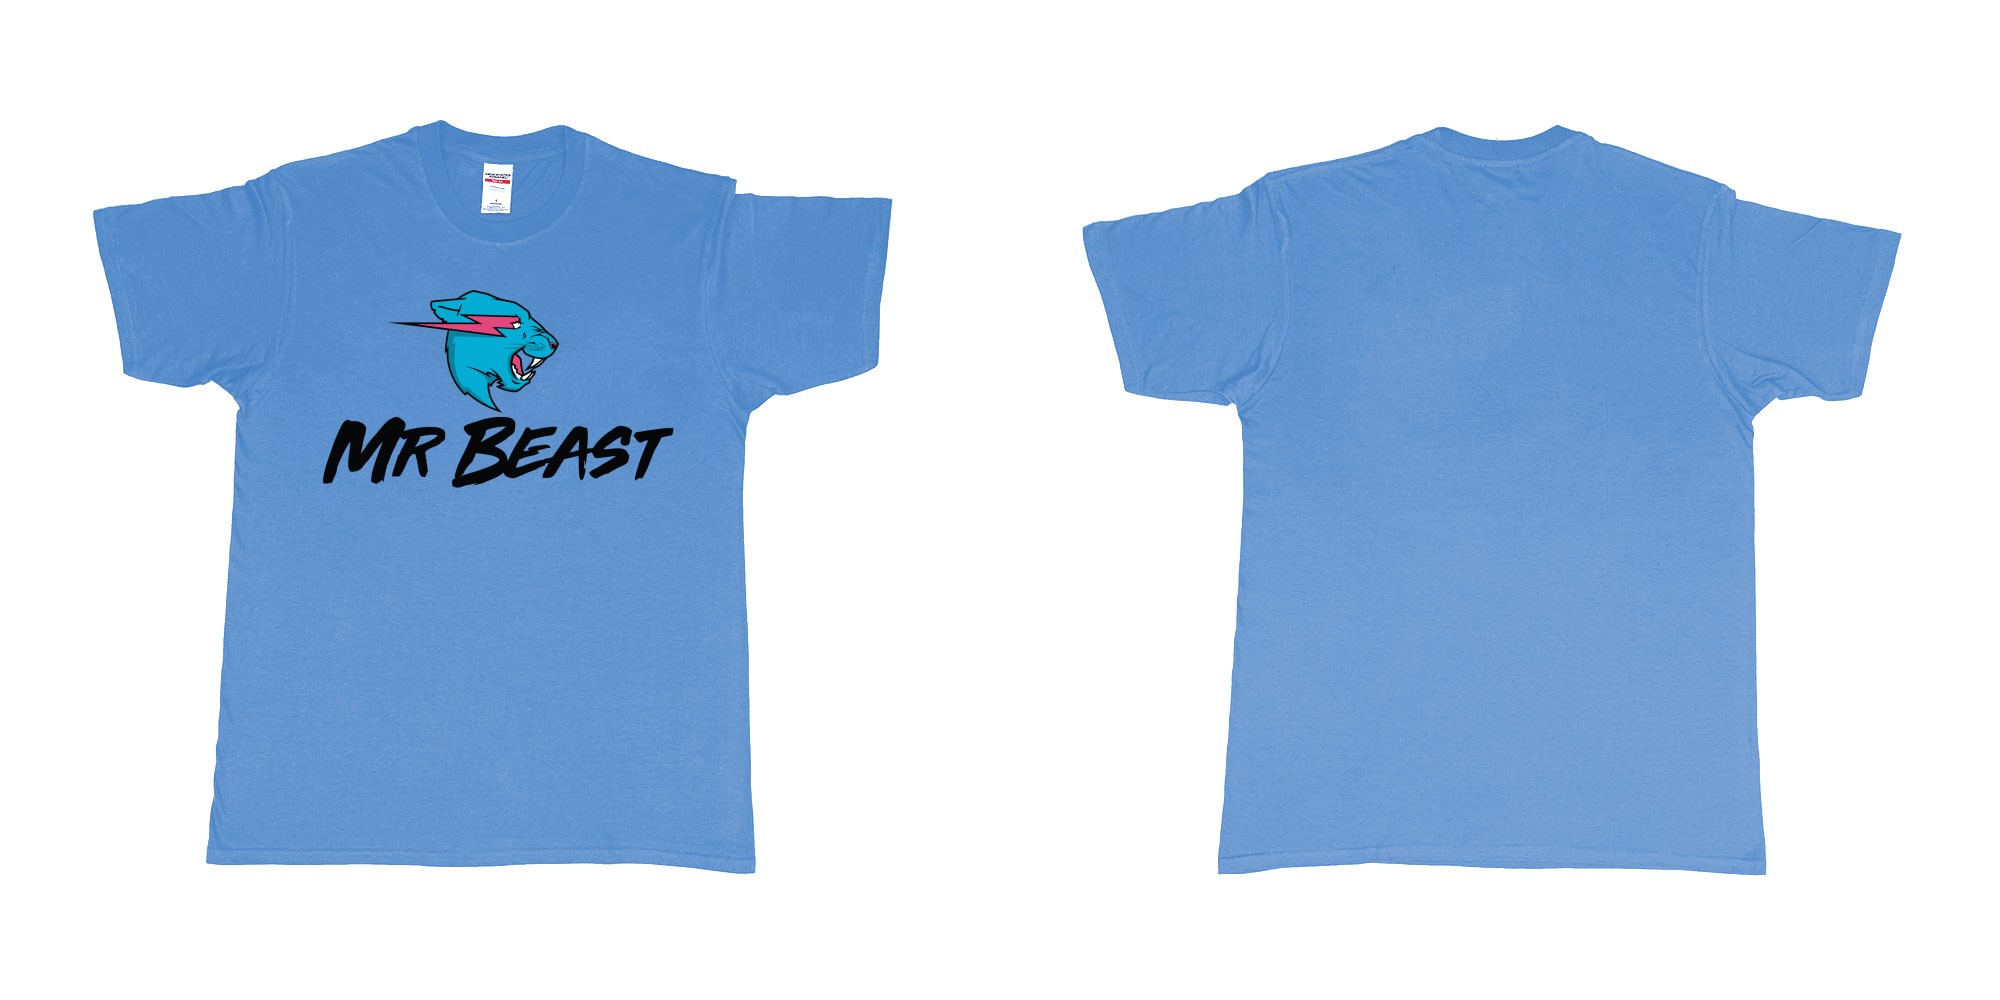 Custom tshirt design mr beast logo in fabric color carolina-blue choice your own text made in Bali by The Pirate Way